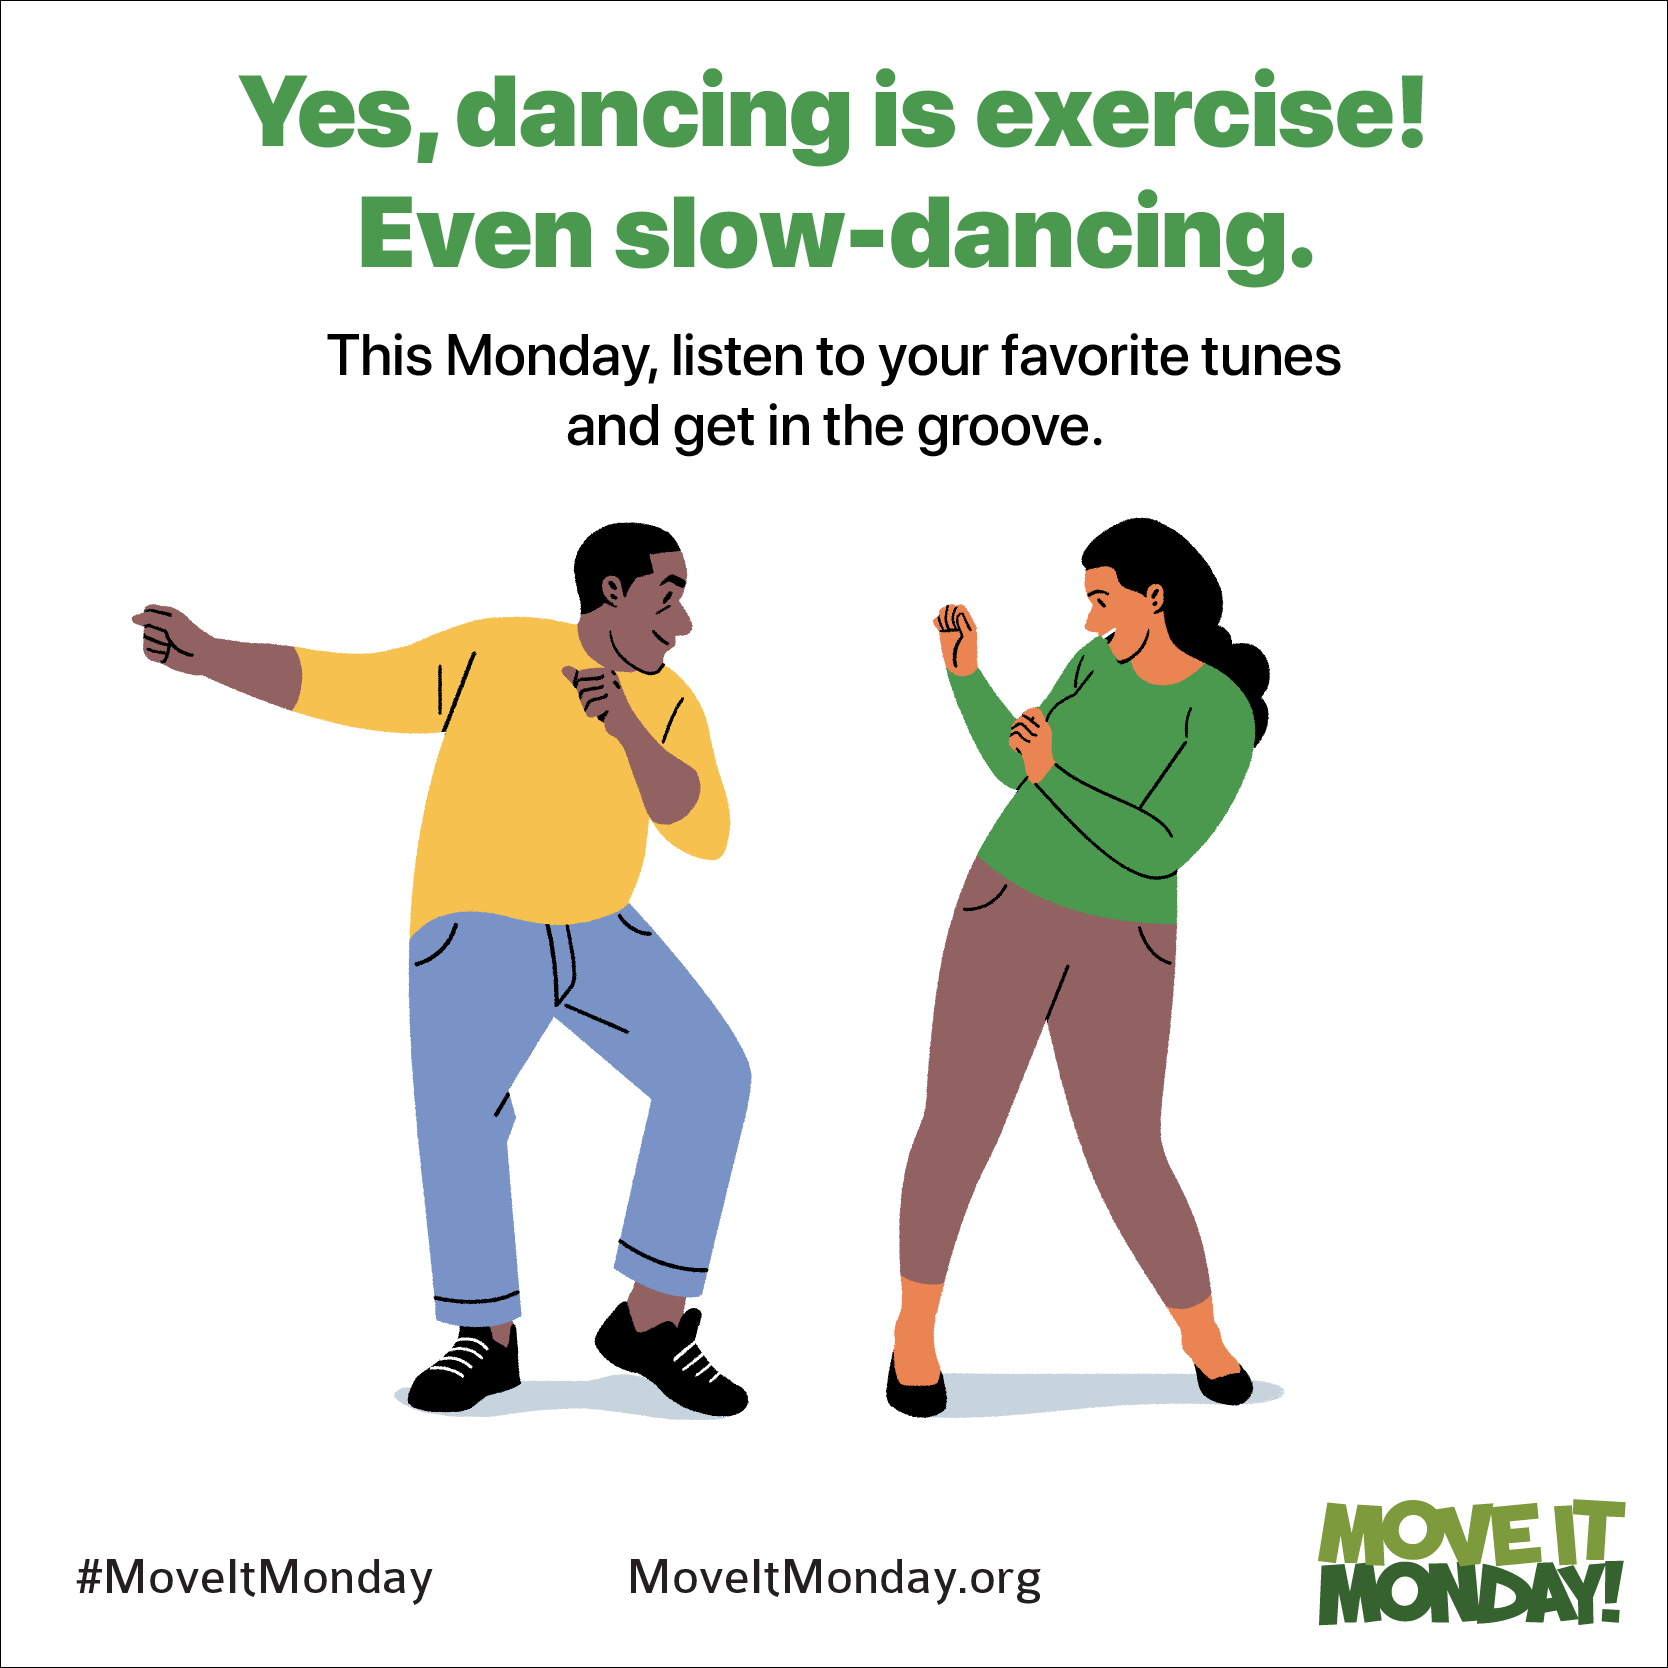 Yes, dancing is exercise! Even slow-dancing.